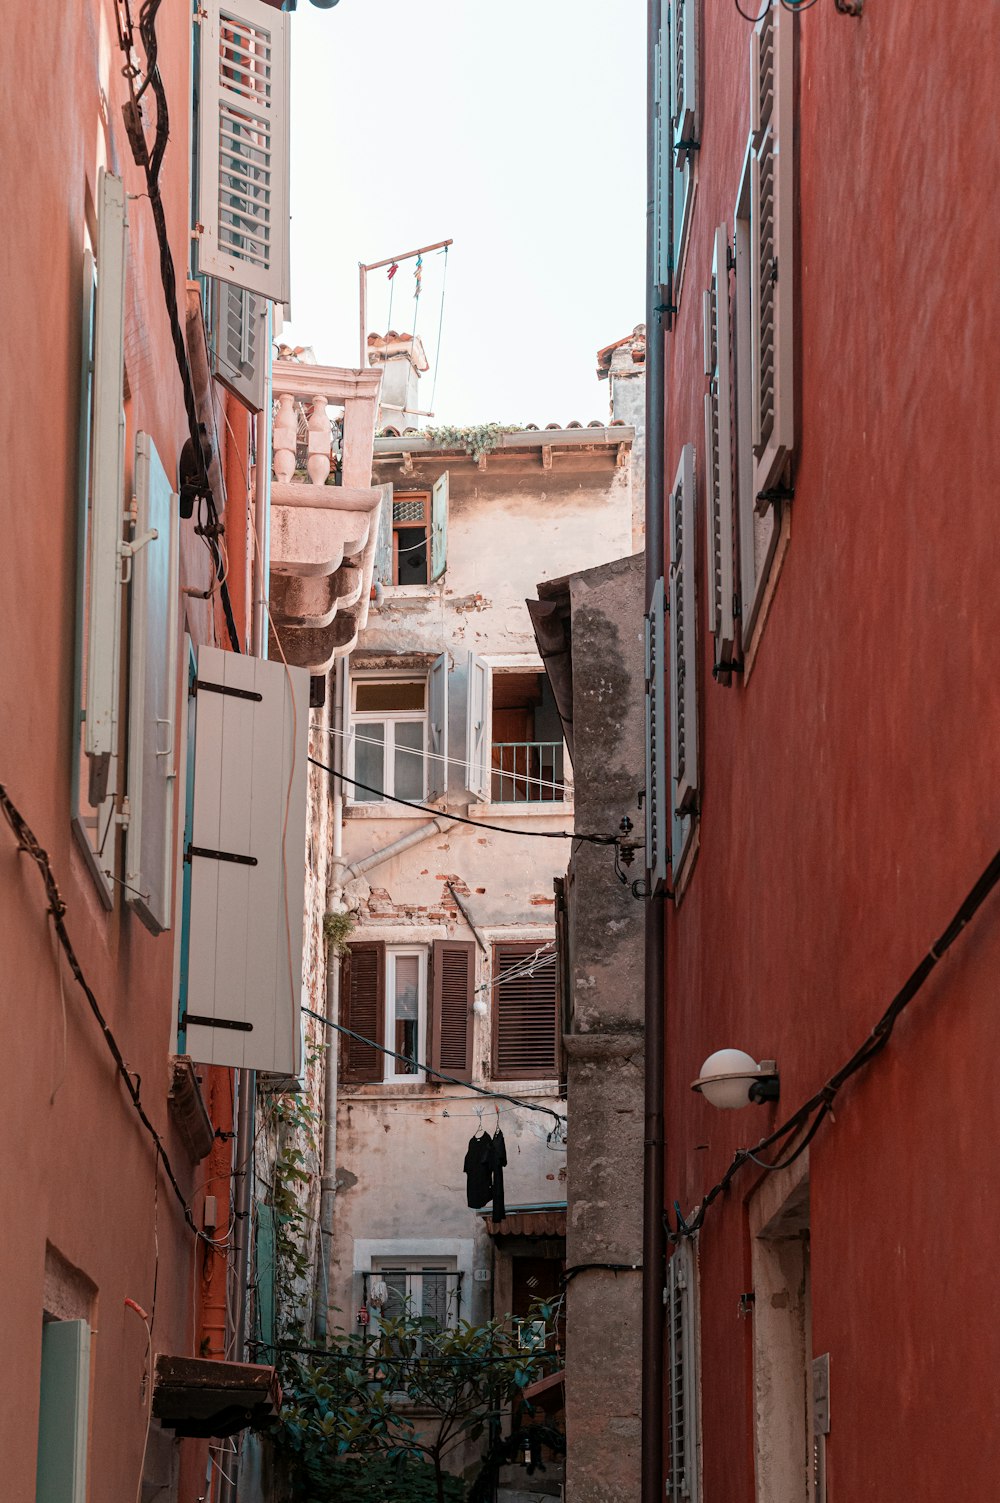 a narrow alley way with a few buildings in the background